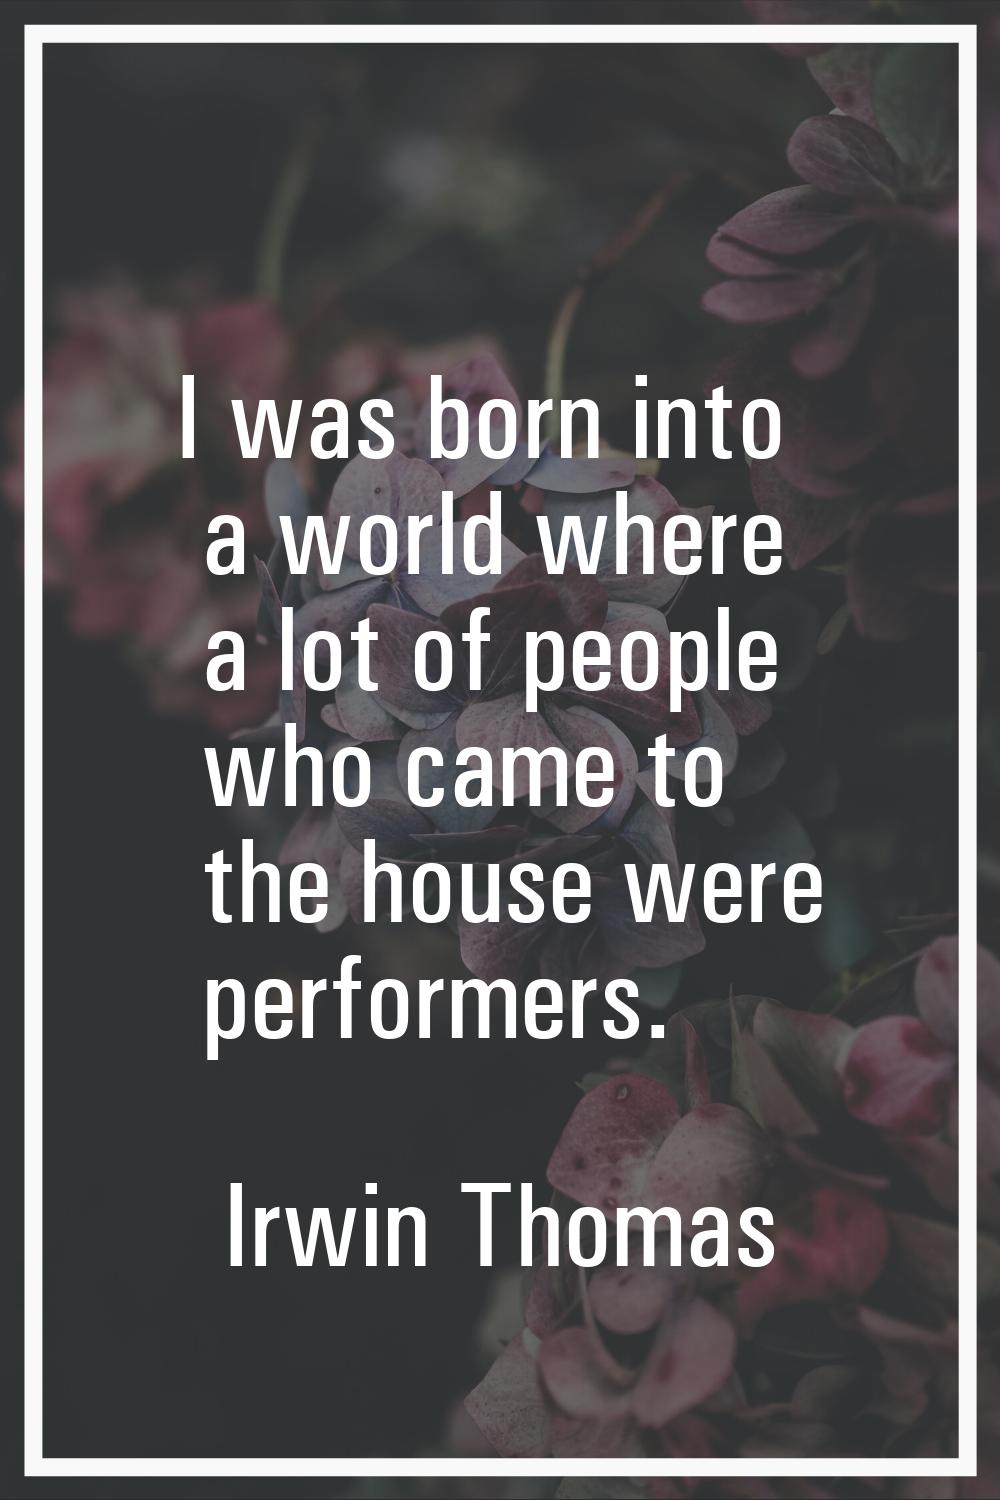 I was born into a world where a lot of people who came to the house were performers.